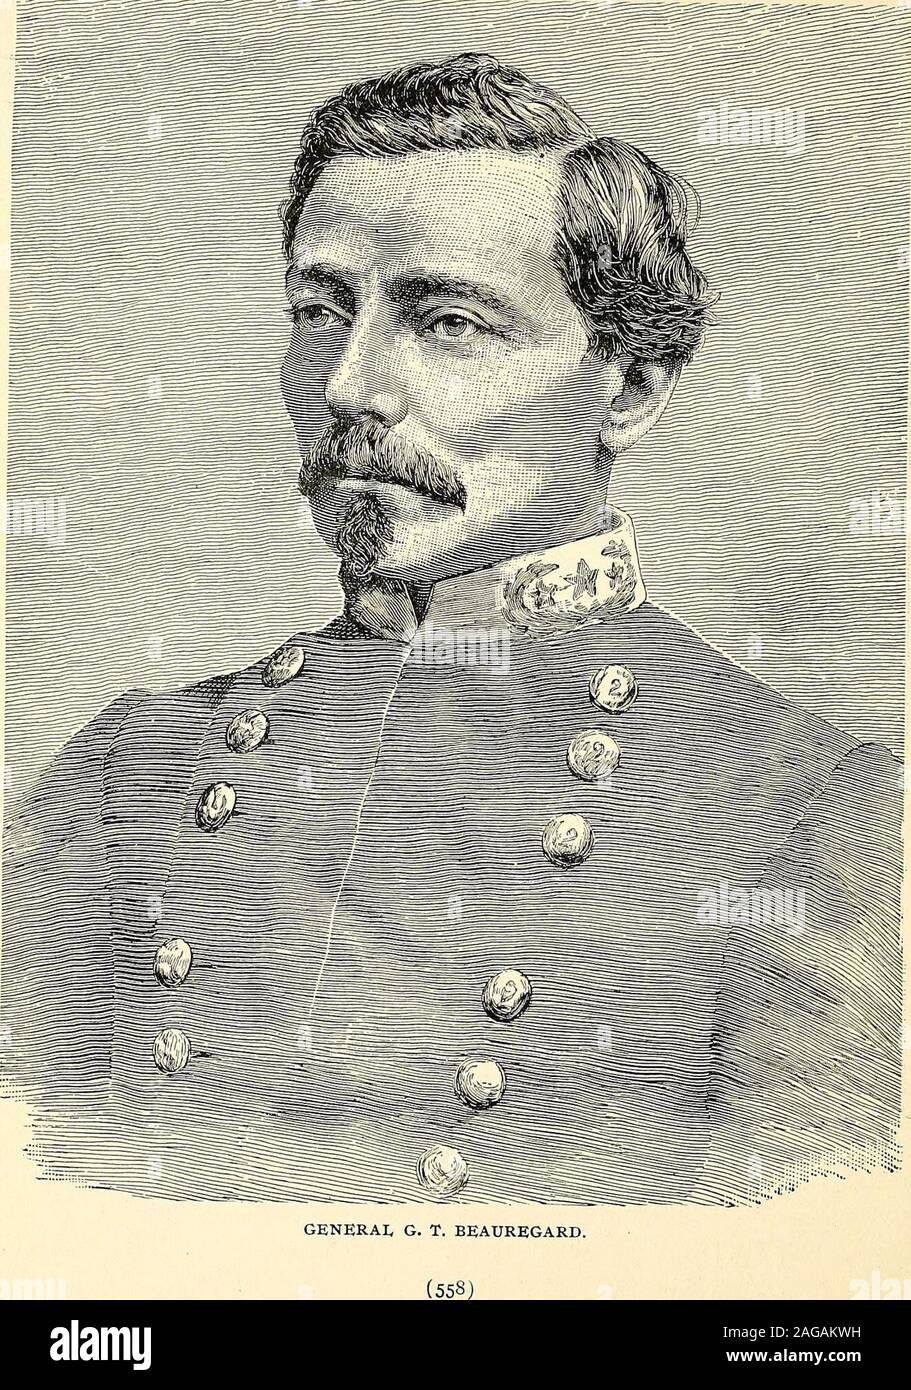 . Gen. Robert Edward Lee; soldier, citizen, and Christian patriot. GENERAL G. T. BEAUREGARD. General Beauregard was born near New Orleans, May aSth, 1818.His father was James Toutant Beauregard, and his mother MarieToutant de Reggio, a lady of Italian descent. His baptismal namewas Gustave Pierre Toutant. Having passed his youth in the parishof his birth and having developed while a lad a decided inclinationfor military affairs, he secured an appointment to West Point, andwas graduated second in the class of 38. Hardee and Sibley, whobecame Confederate generals, and McDowell, Granger, Berry an Stock Photo